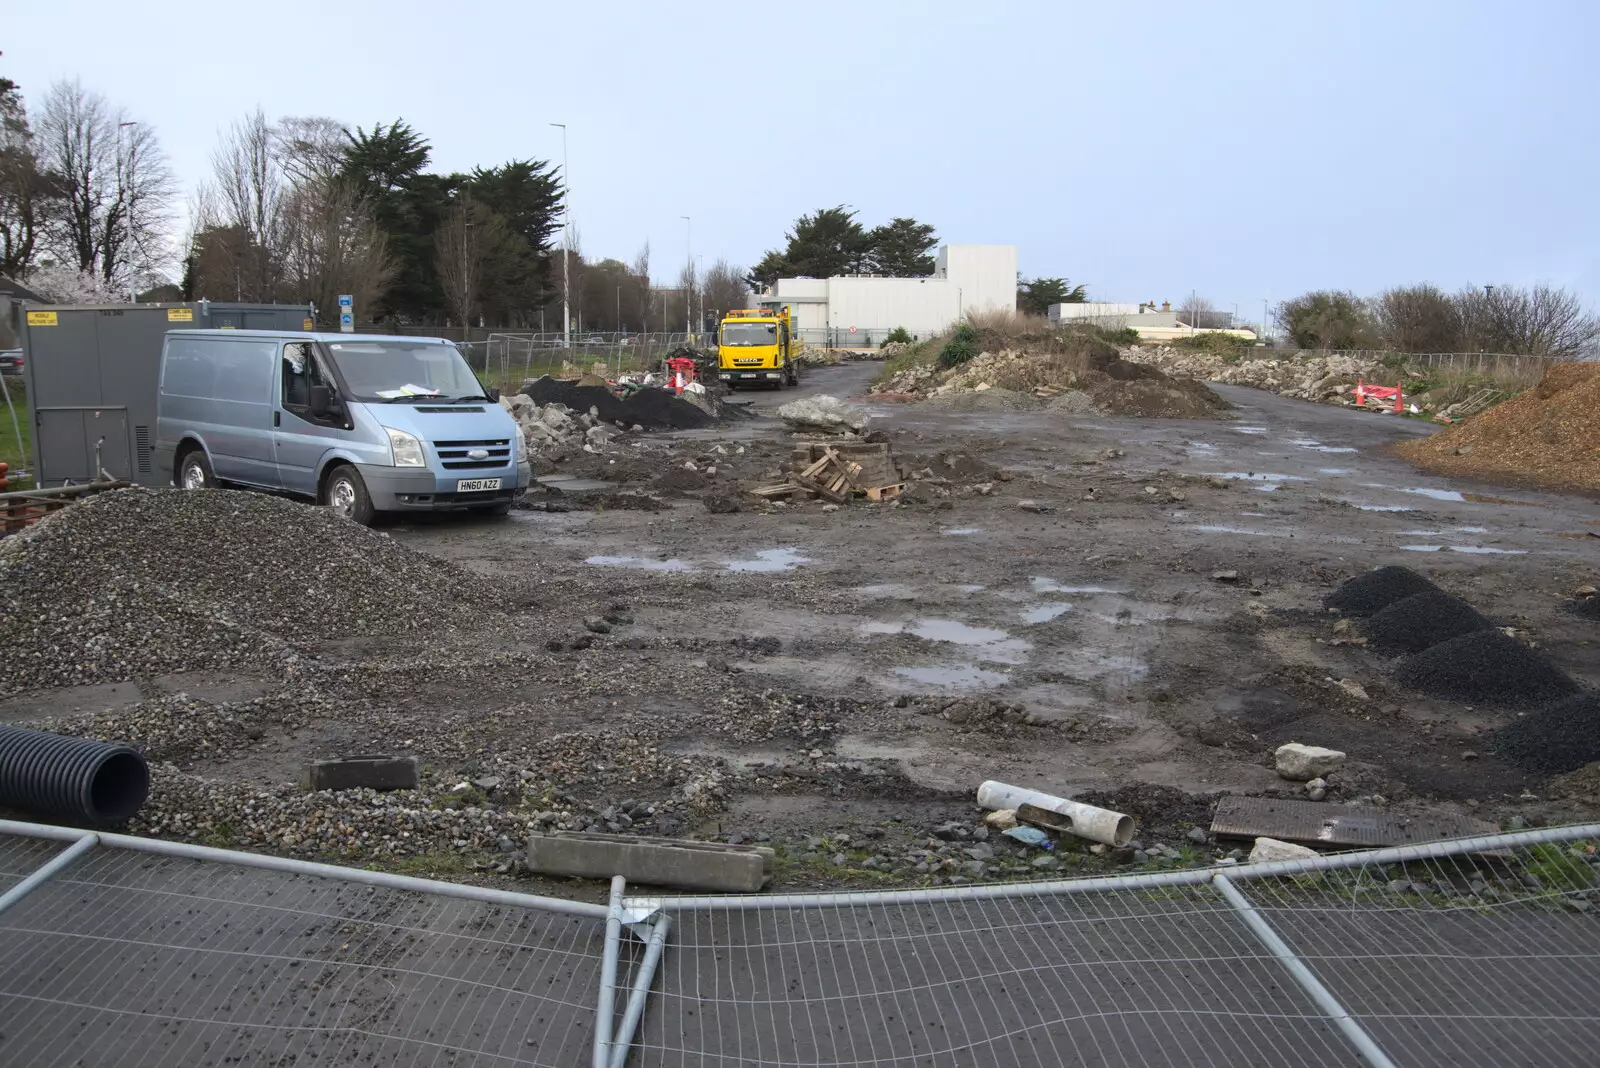 Booterstown's getting some sort of skate park, from The End of the Breffni, Blackrock, Dublin - 18th February 2023